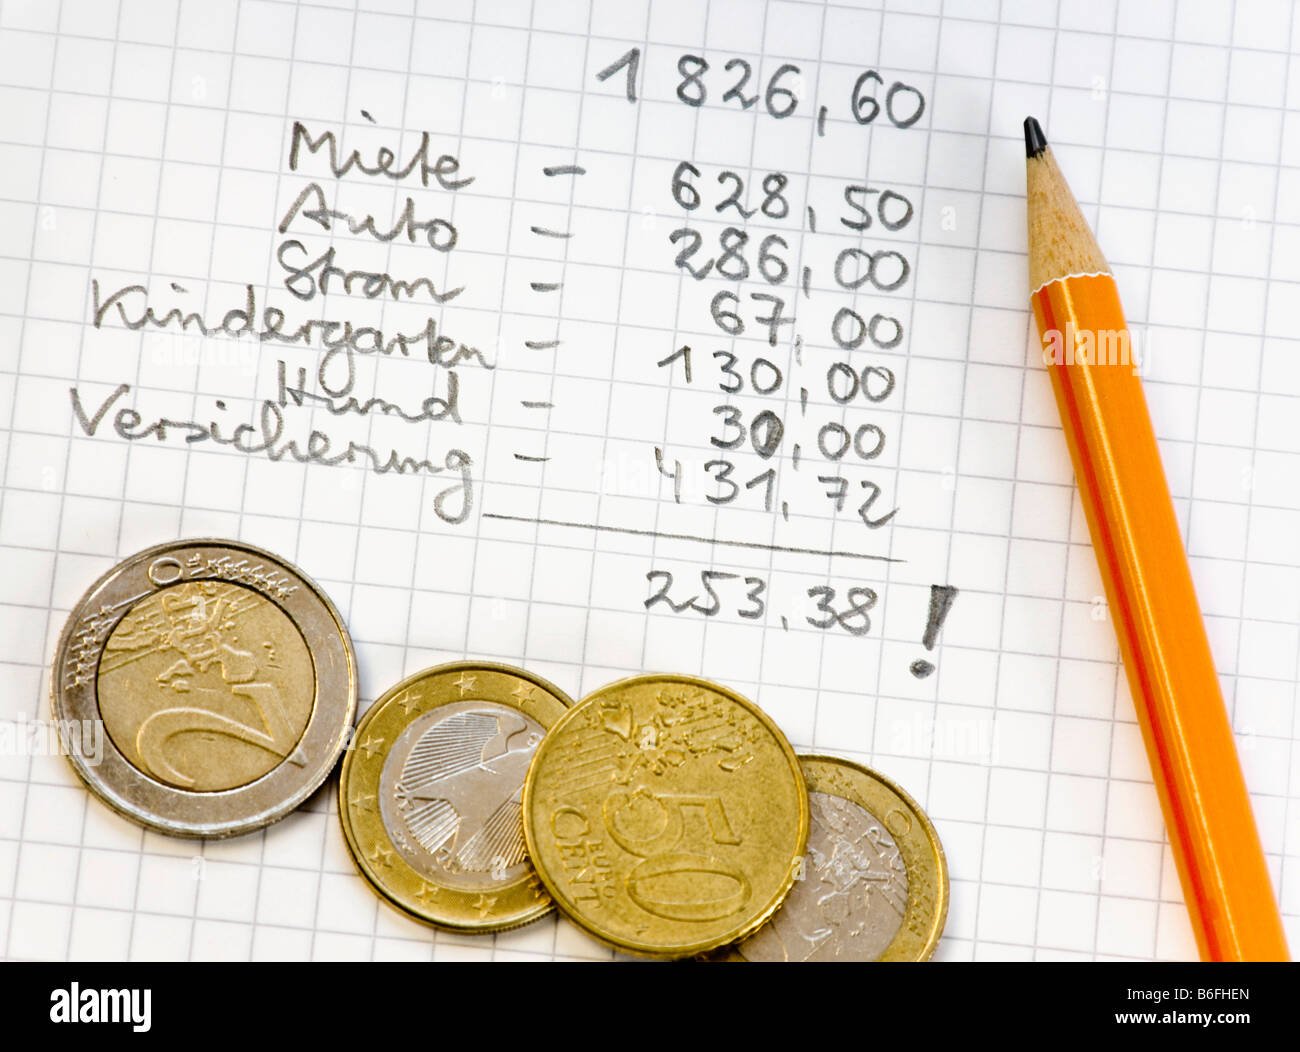 Monthly costs or living expenses listed on grid paper, with pencil and coins Stock Photo